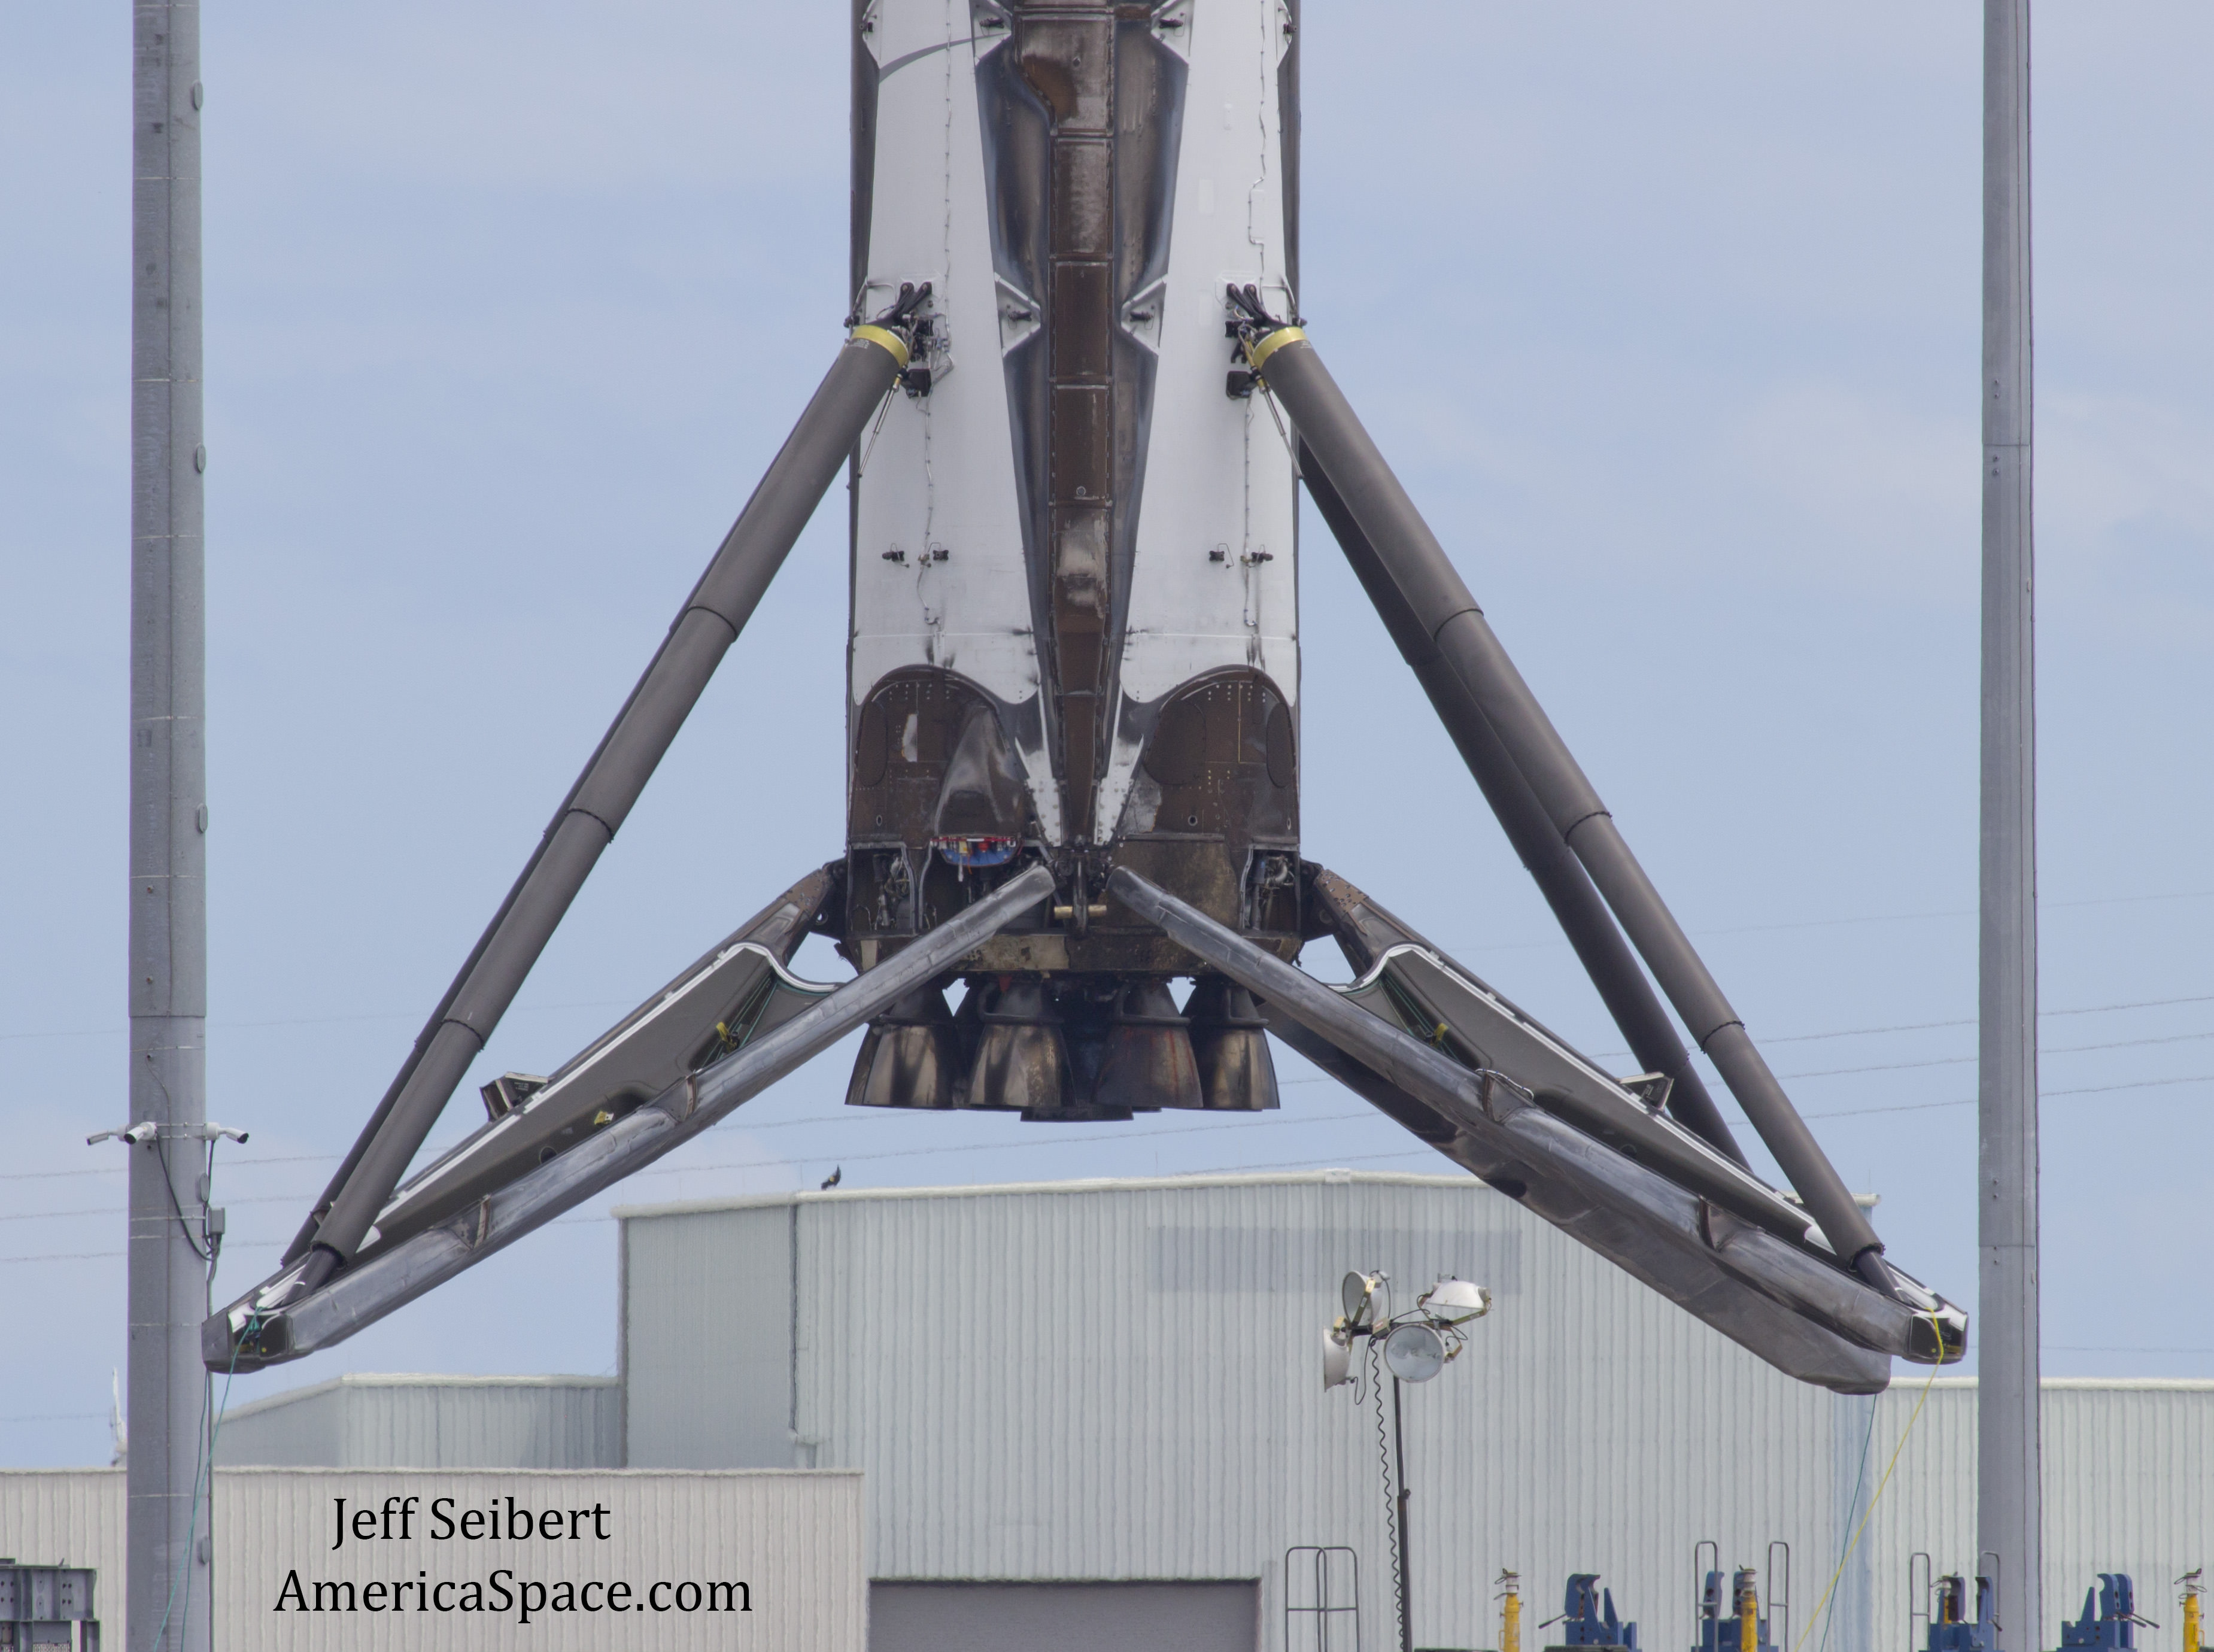 First stage booster from the SpaceX JCSAT-14 launch hoisted by crane on May 10, 2016 from drone ship to work pedestal on land 12 hours after arriving back in Port Canaveral, Florida.  Credit: Jeff Seibert/AmericaSpace 